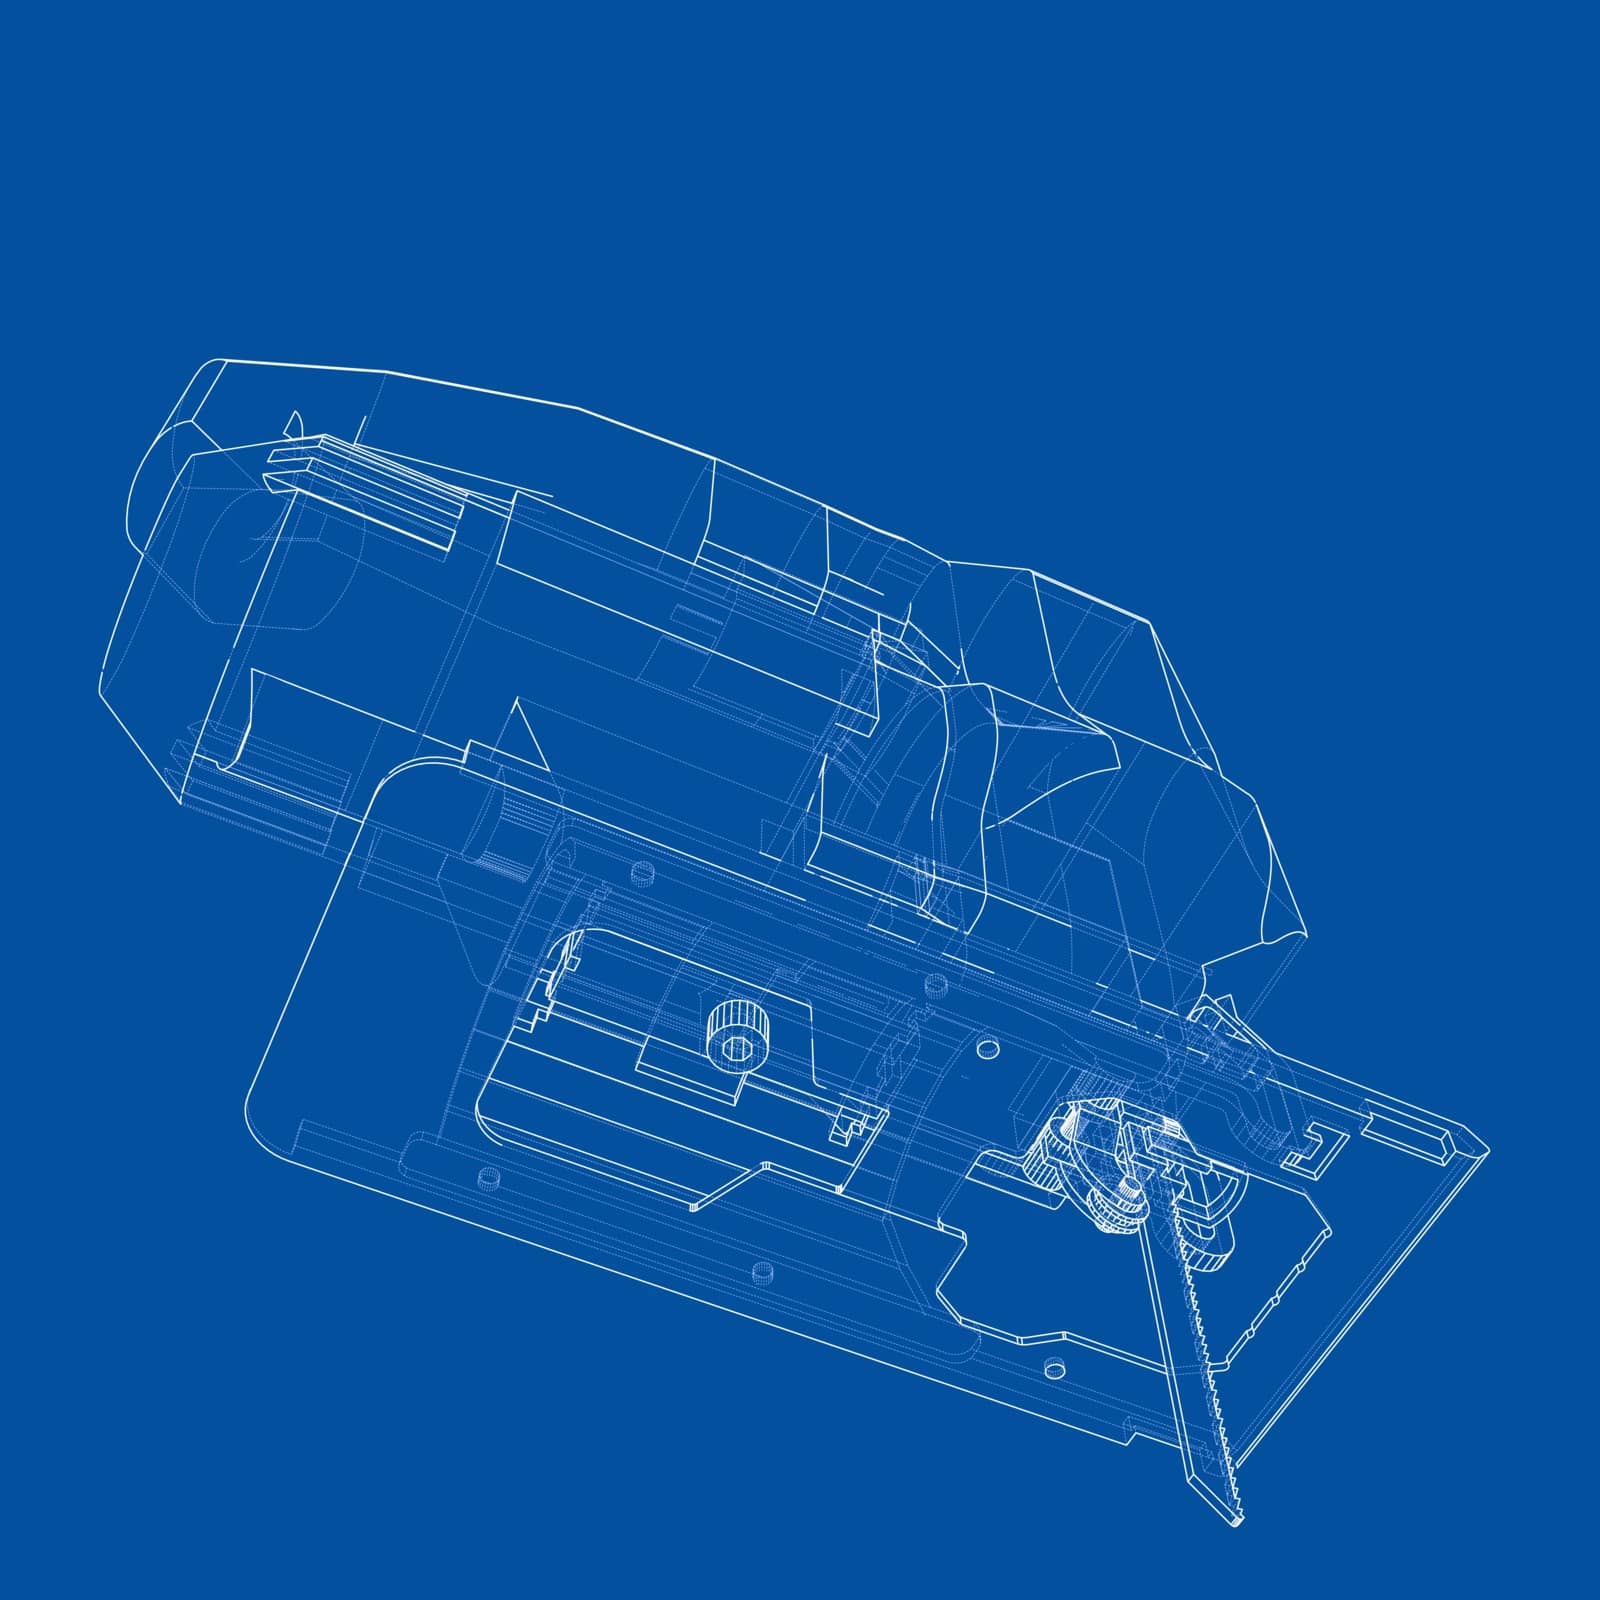 Outline Jig saw. Vector image rendered from 3d model in sketch style or drawing. Blue background